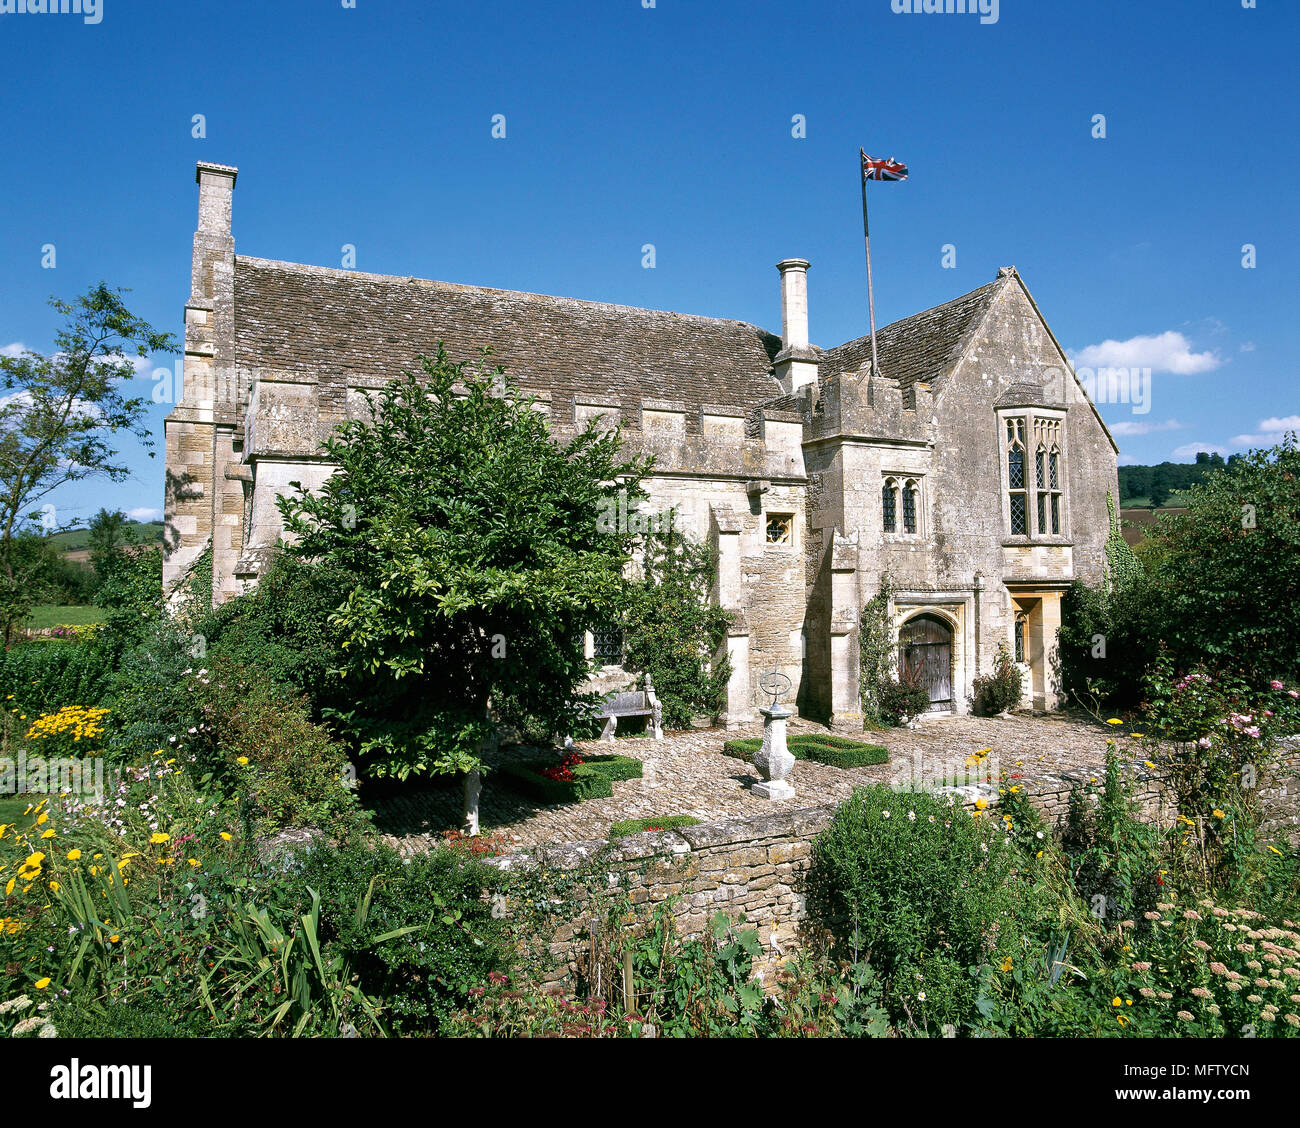 An exterior of a stone country house in a medieval castle style, Stock Photo